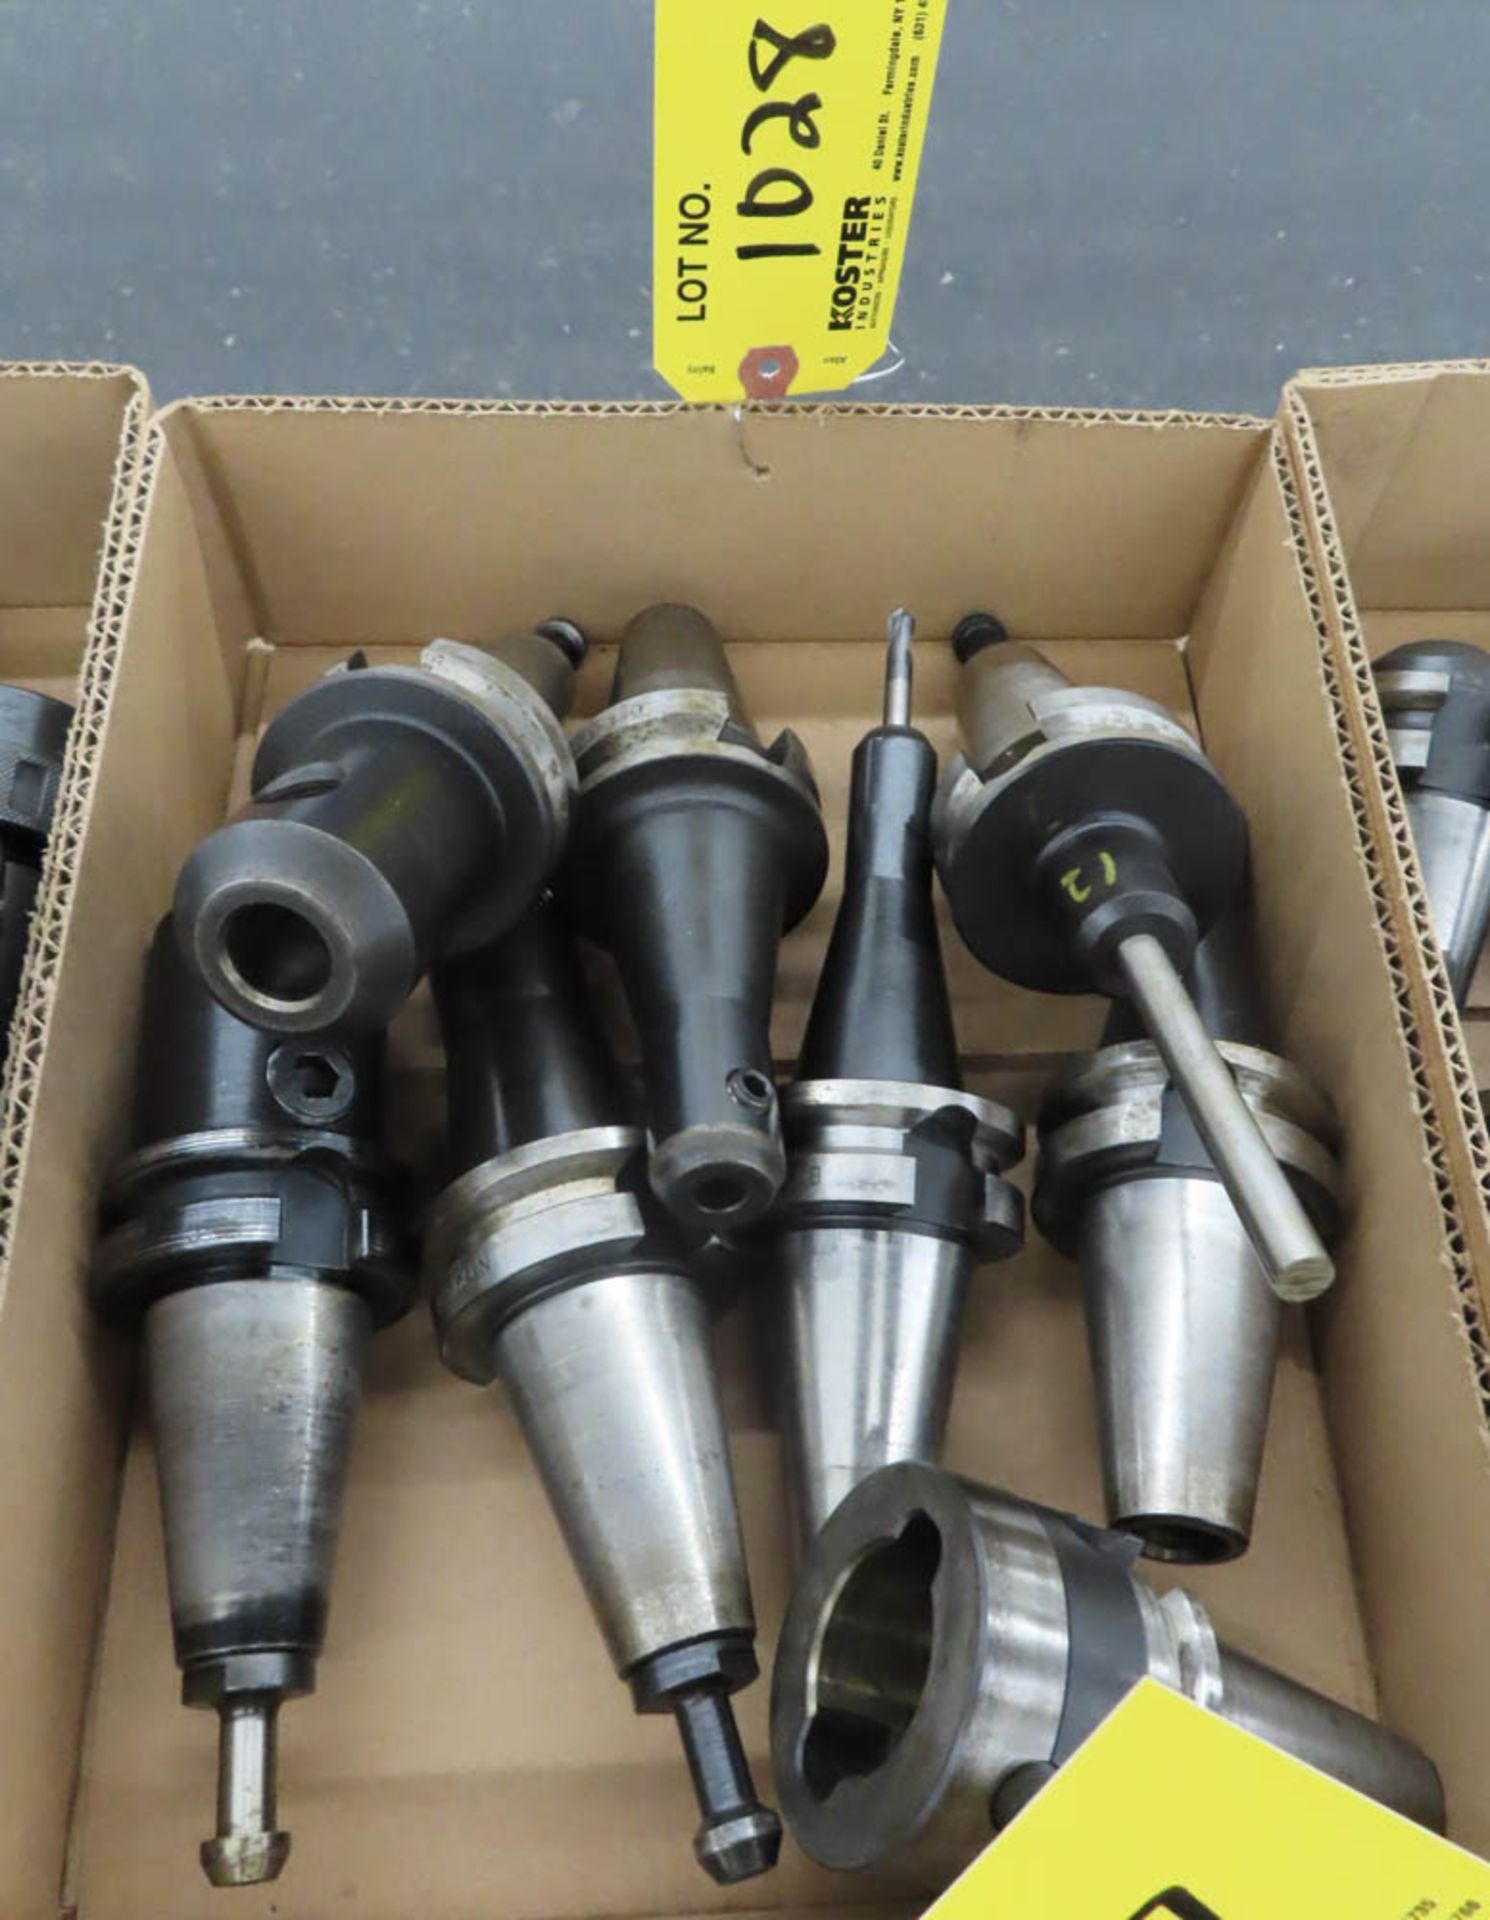 LOT OF ASSORTED BT40 TOOL HOLDERS